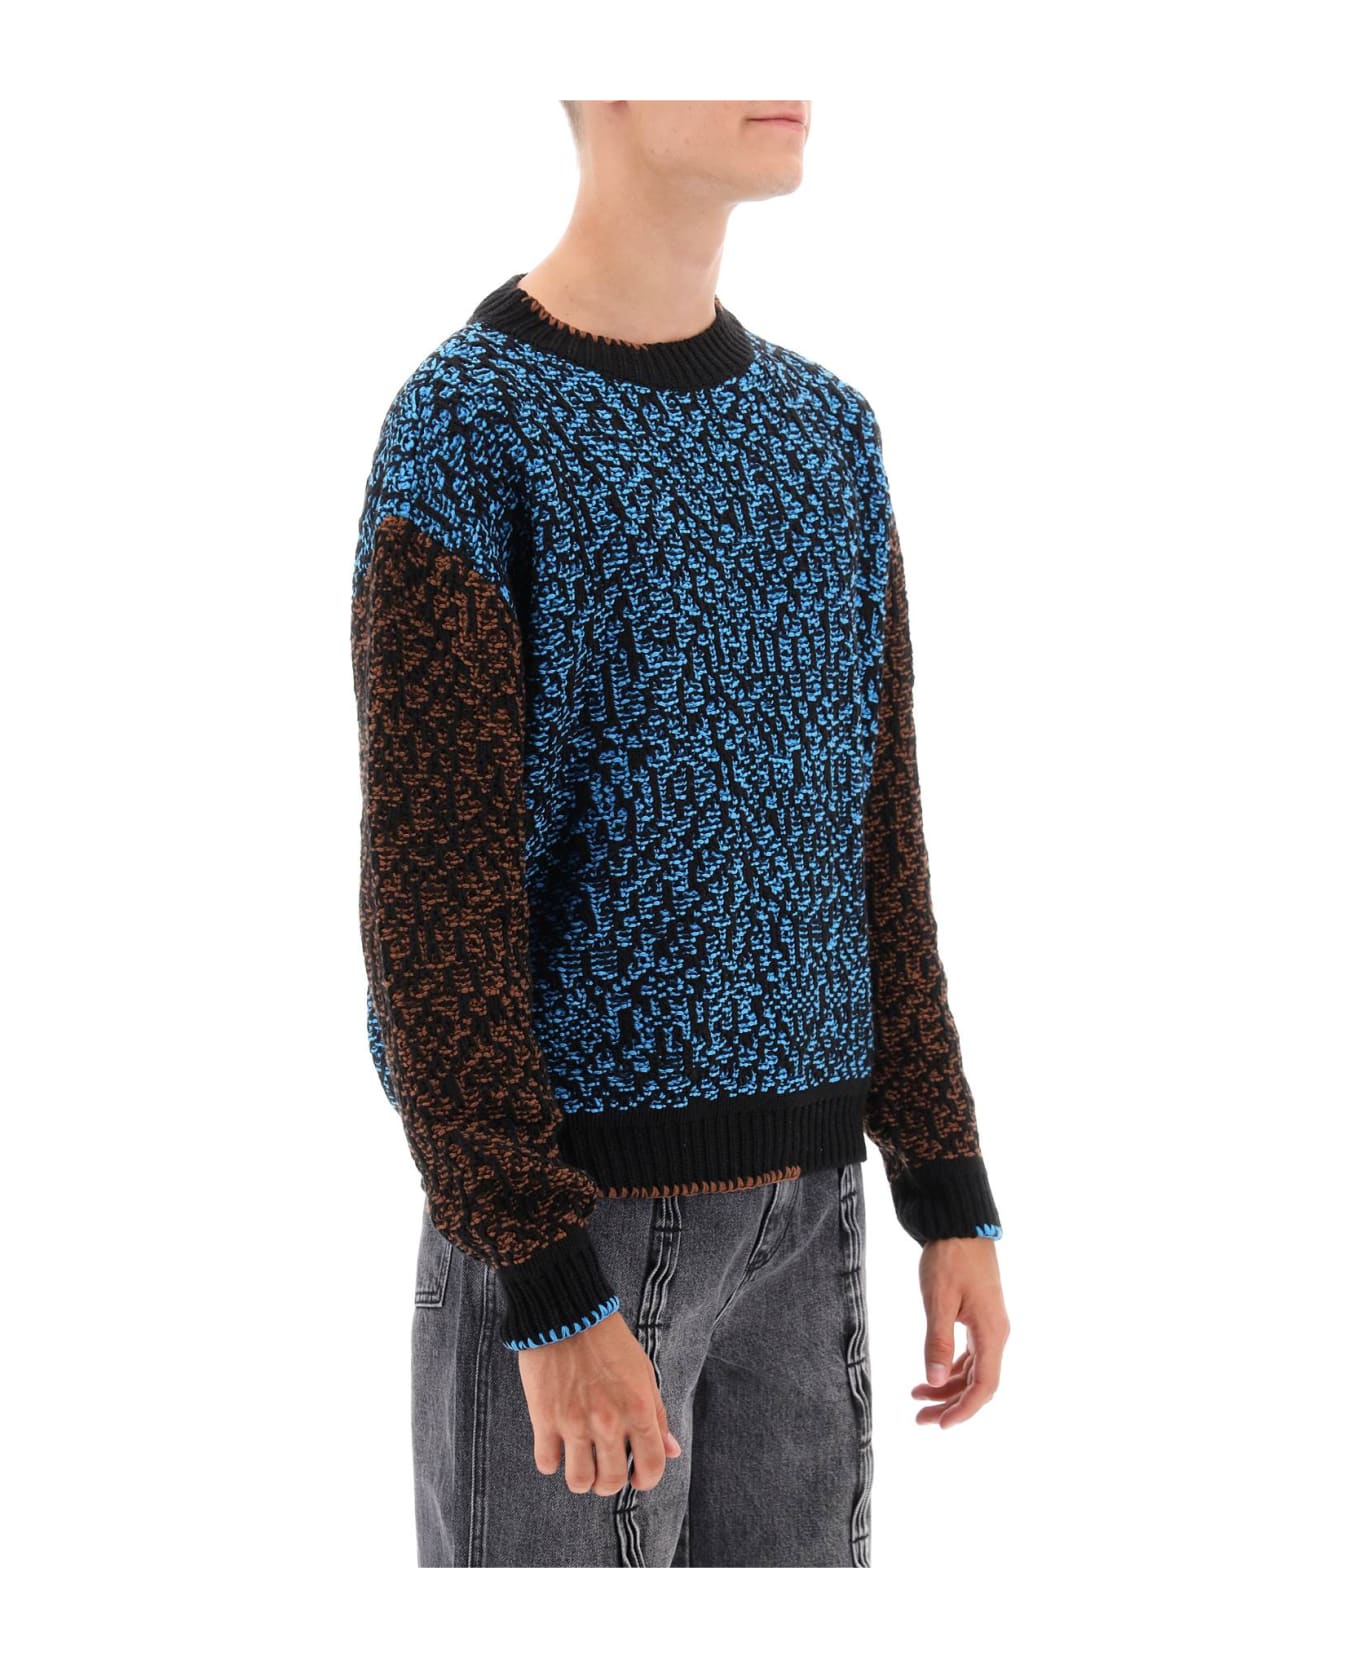 Andersson Bell Multicolored Net Cotton Blend Sweater - MULTI